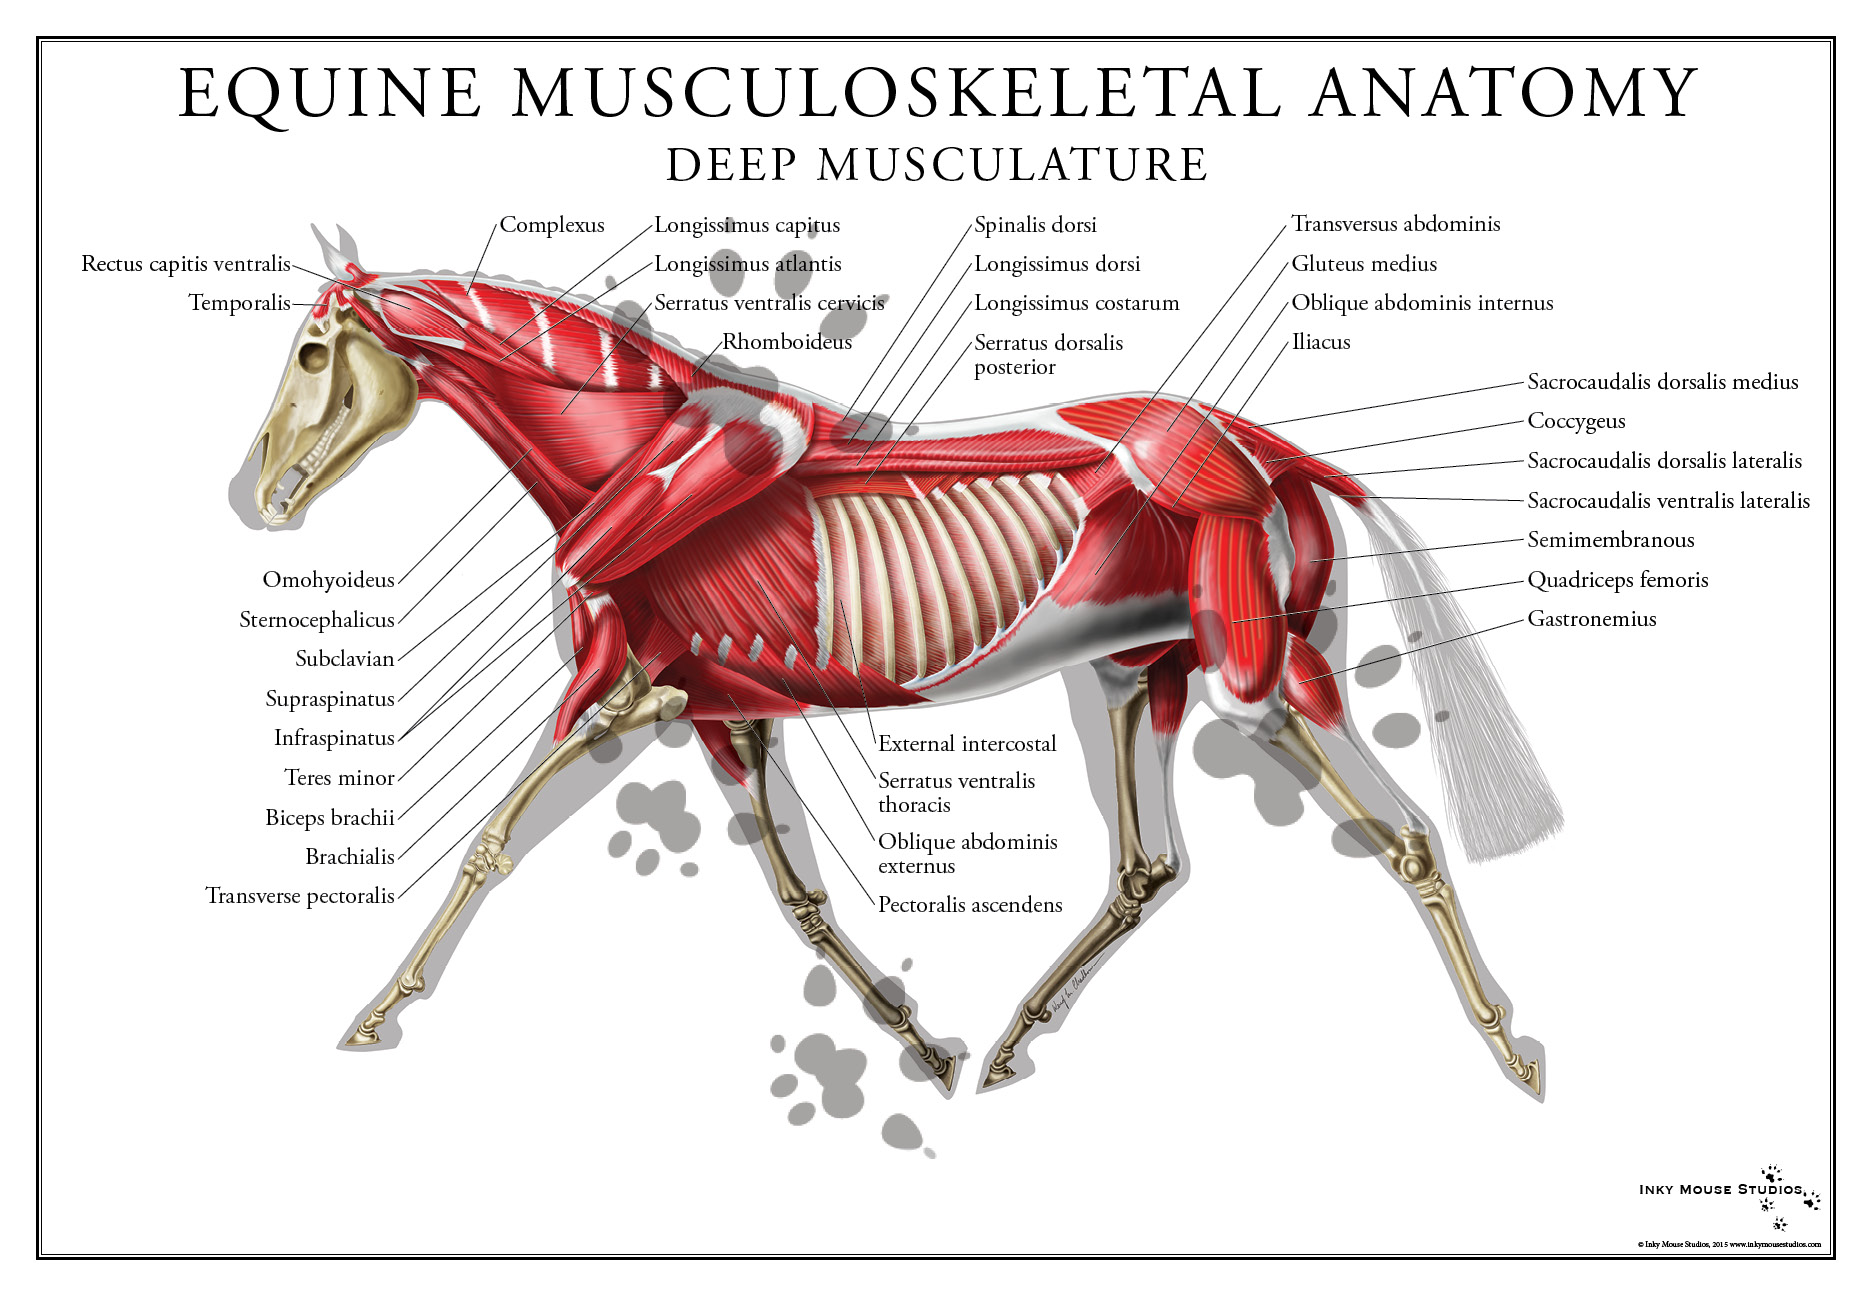 Equine Deep Muscular System Poster